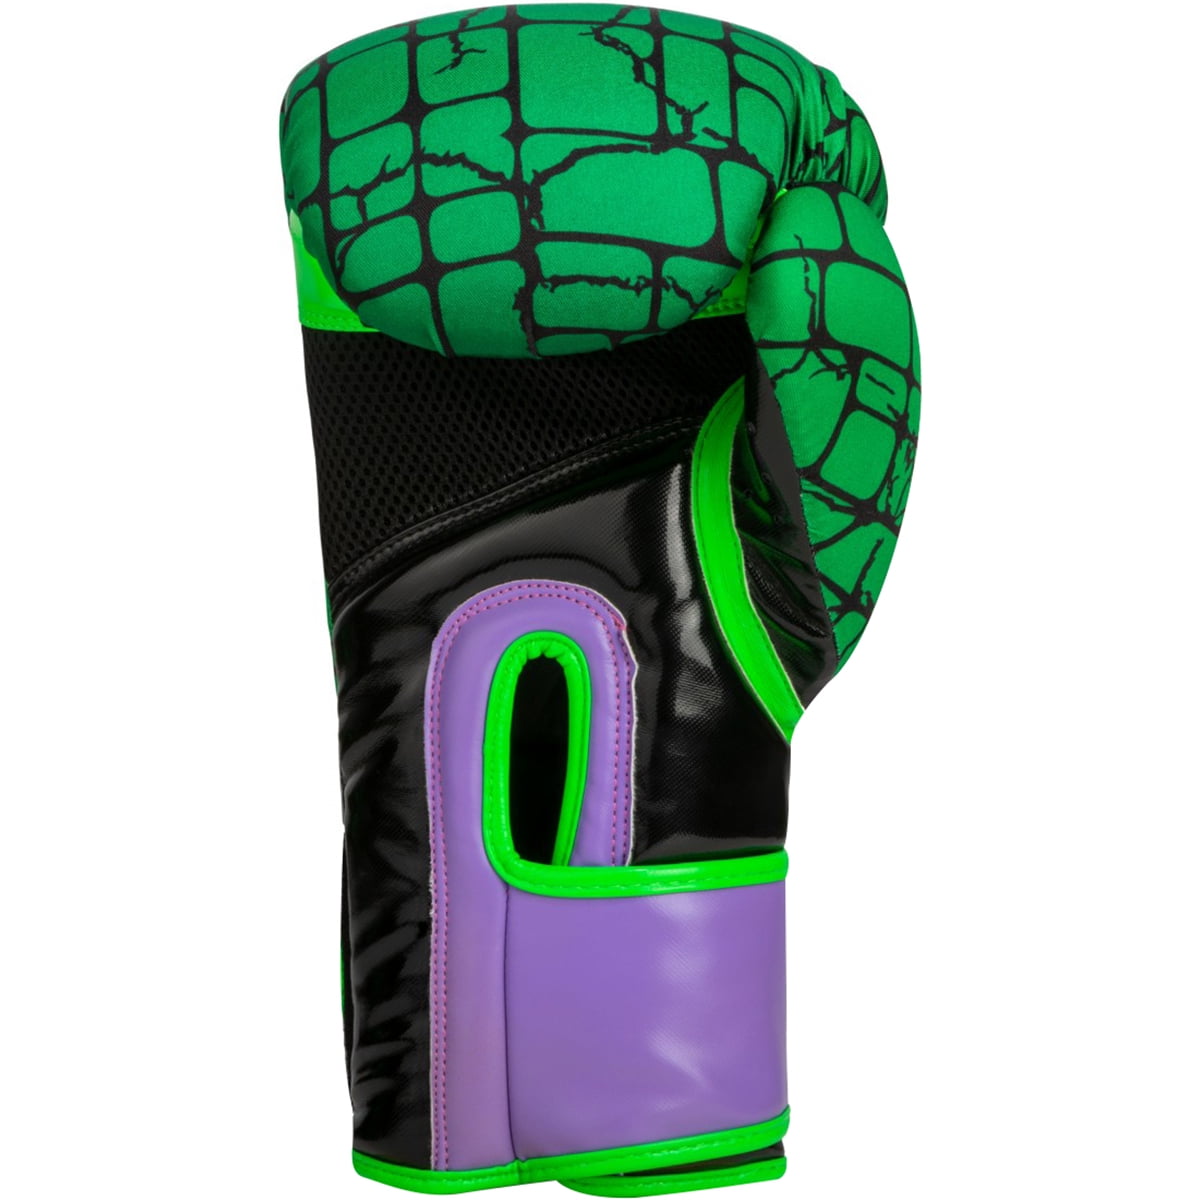 Goliath Title Boxing Infused Foam Training Boxing Gloves